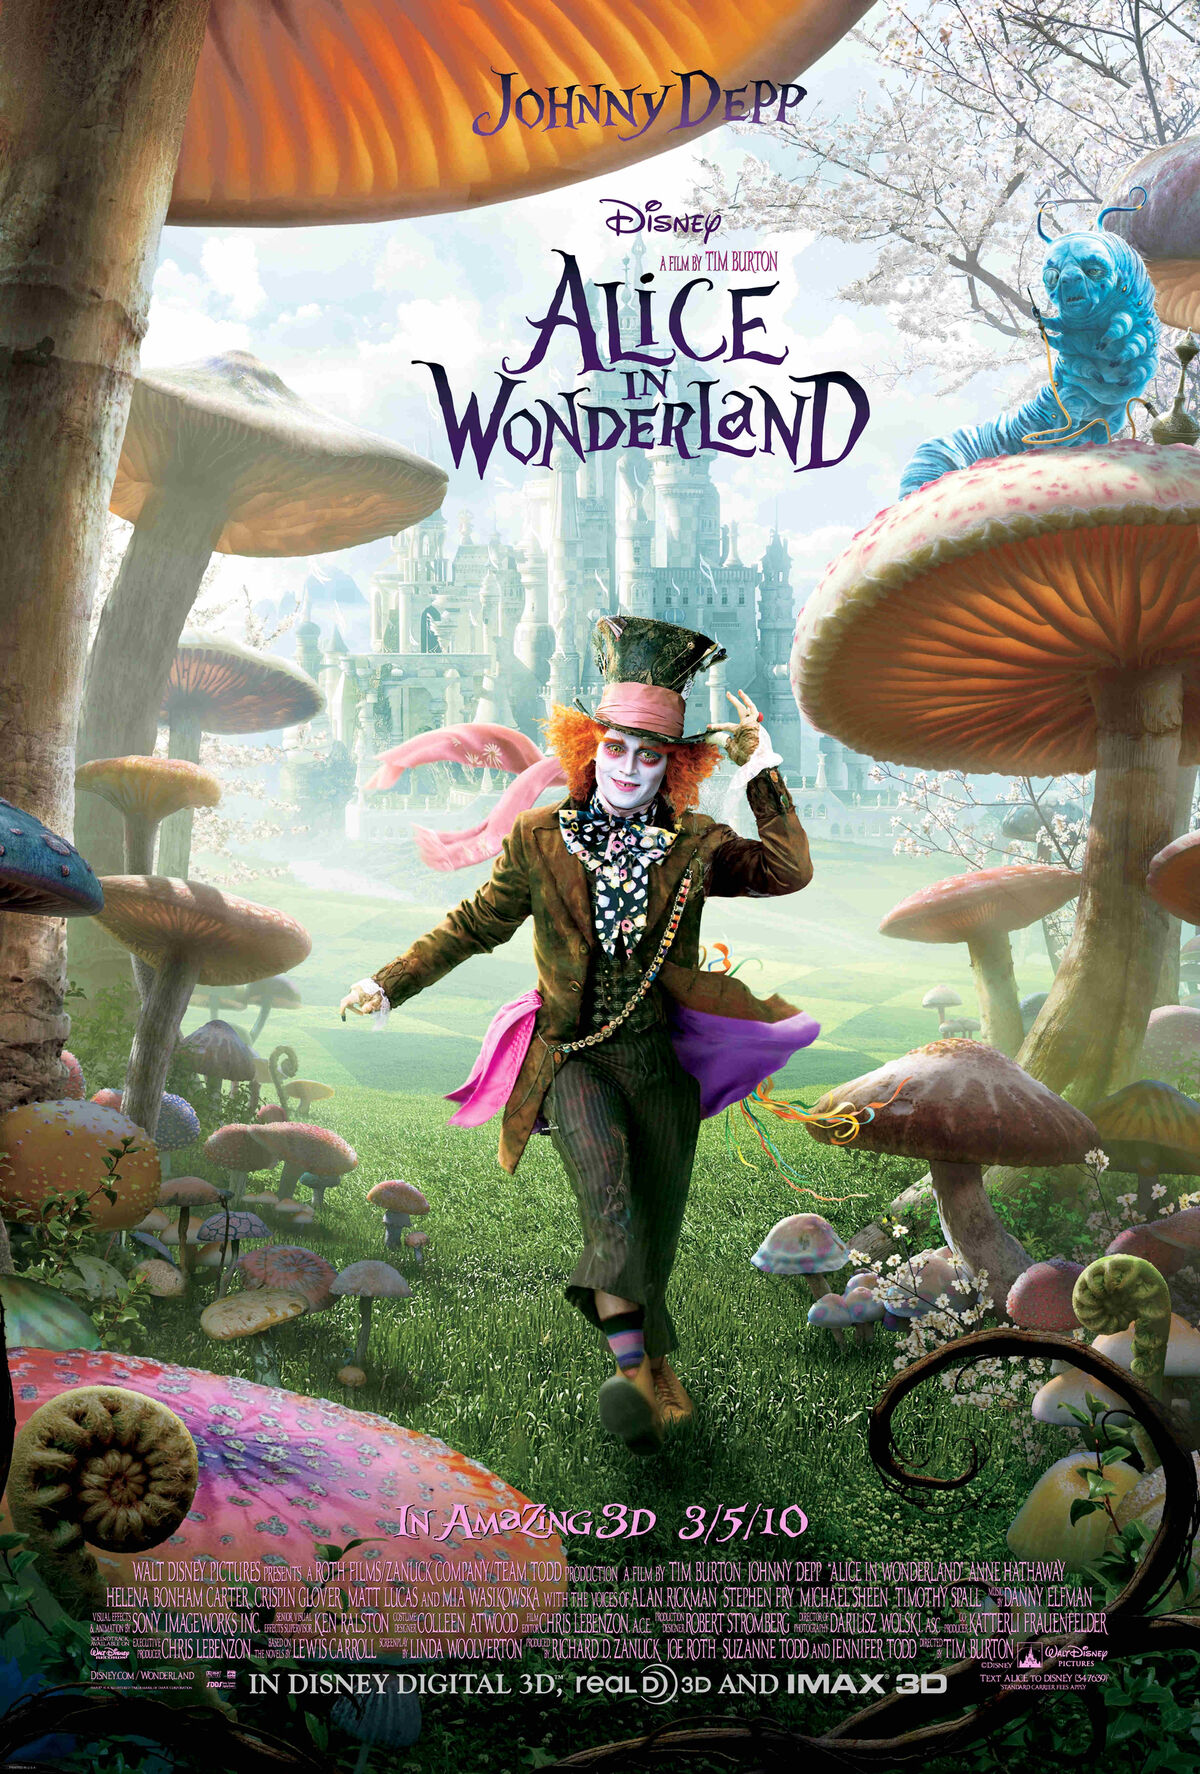 Hey Alice in Wonderland Fans! We've Spotted The Perfect New